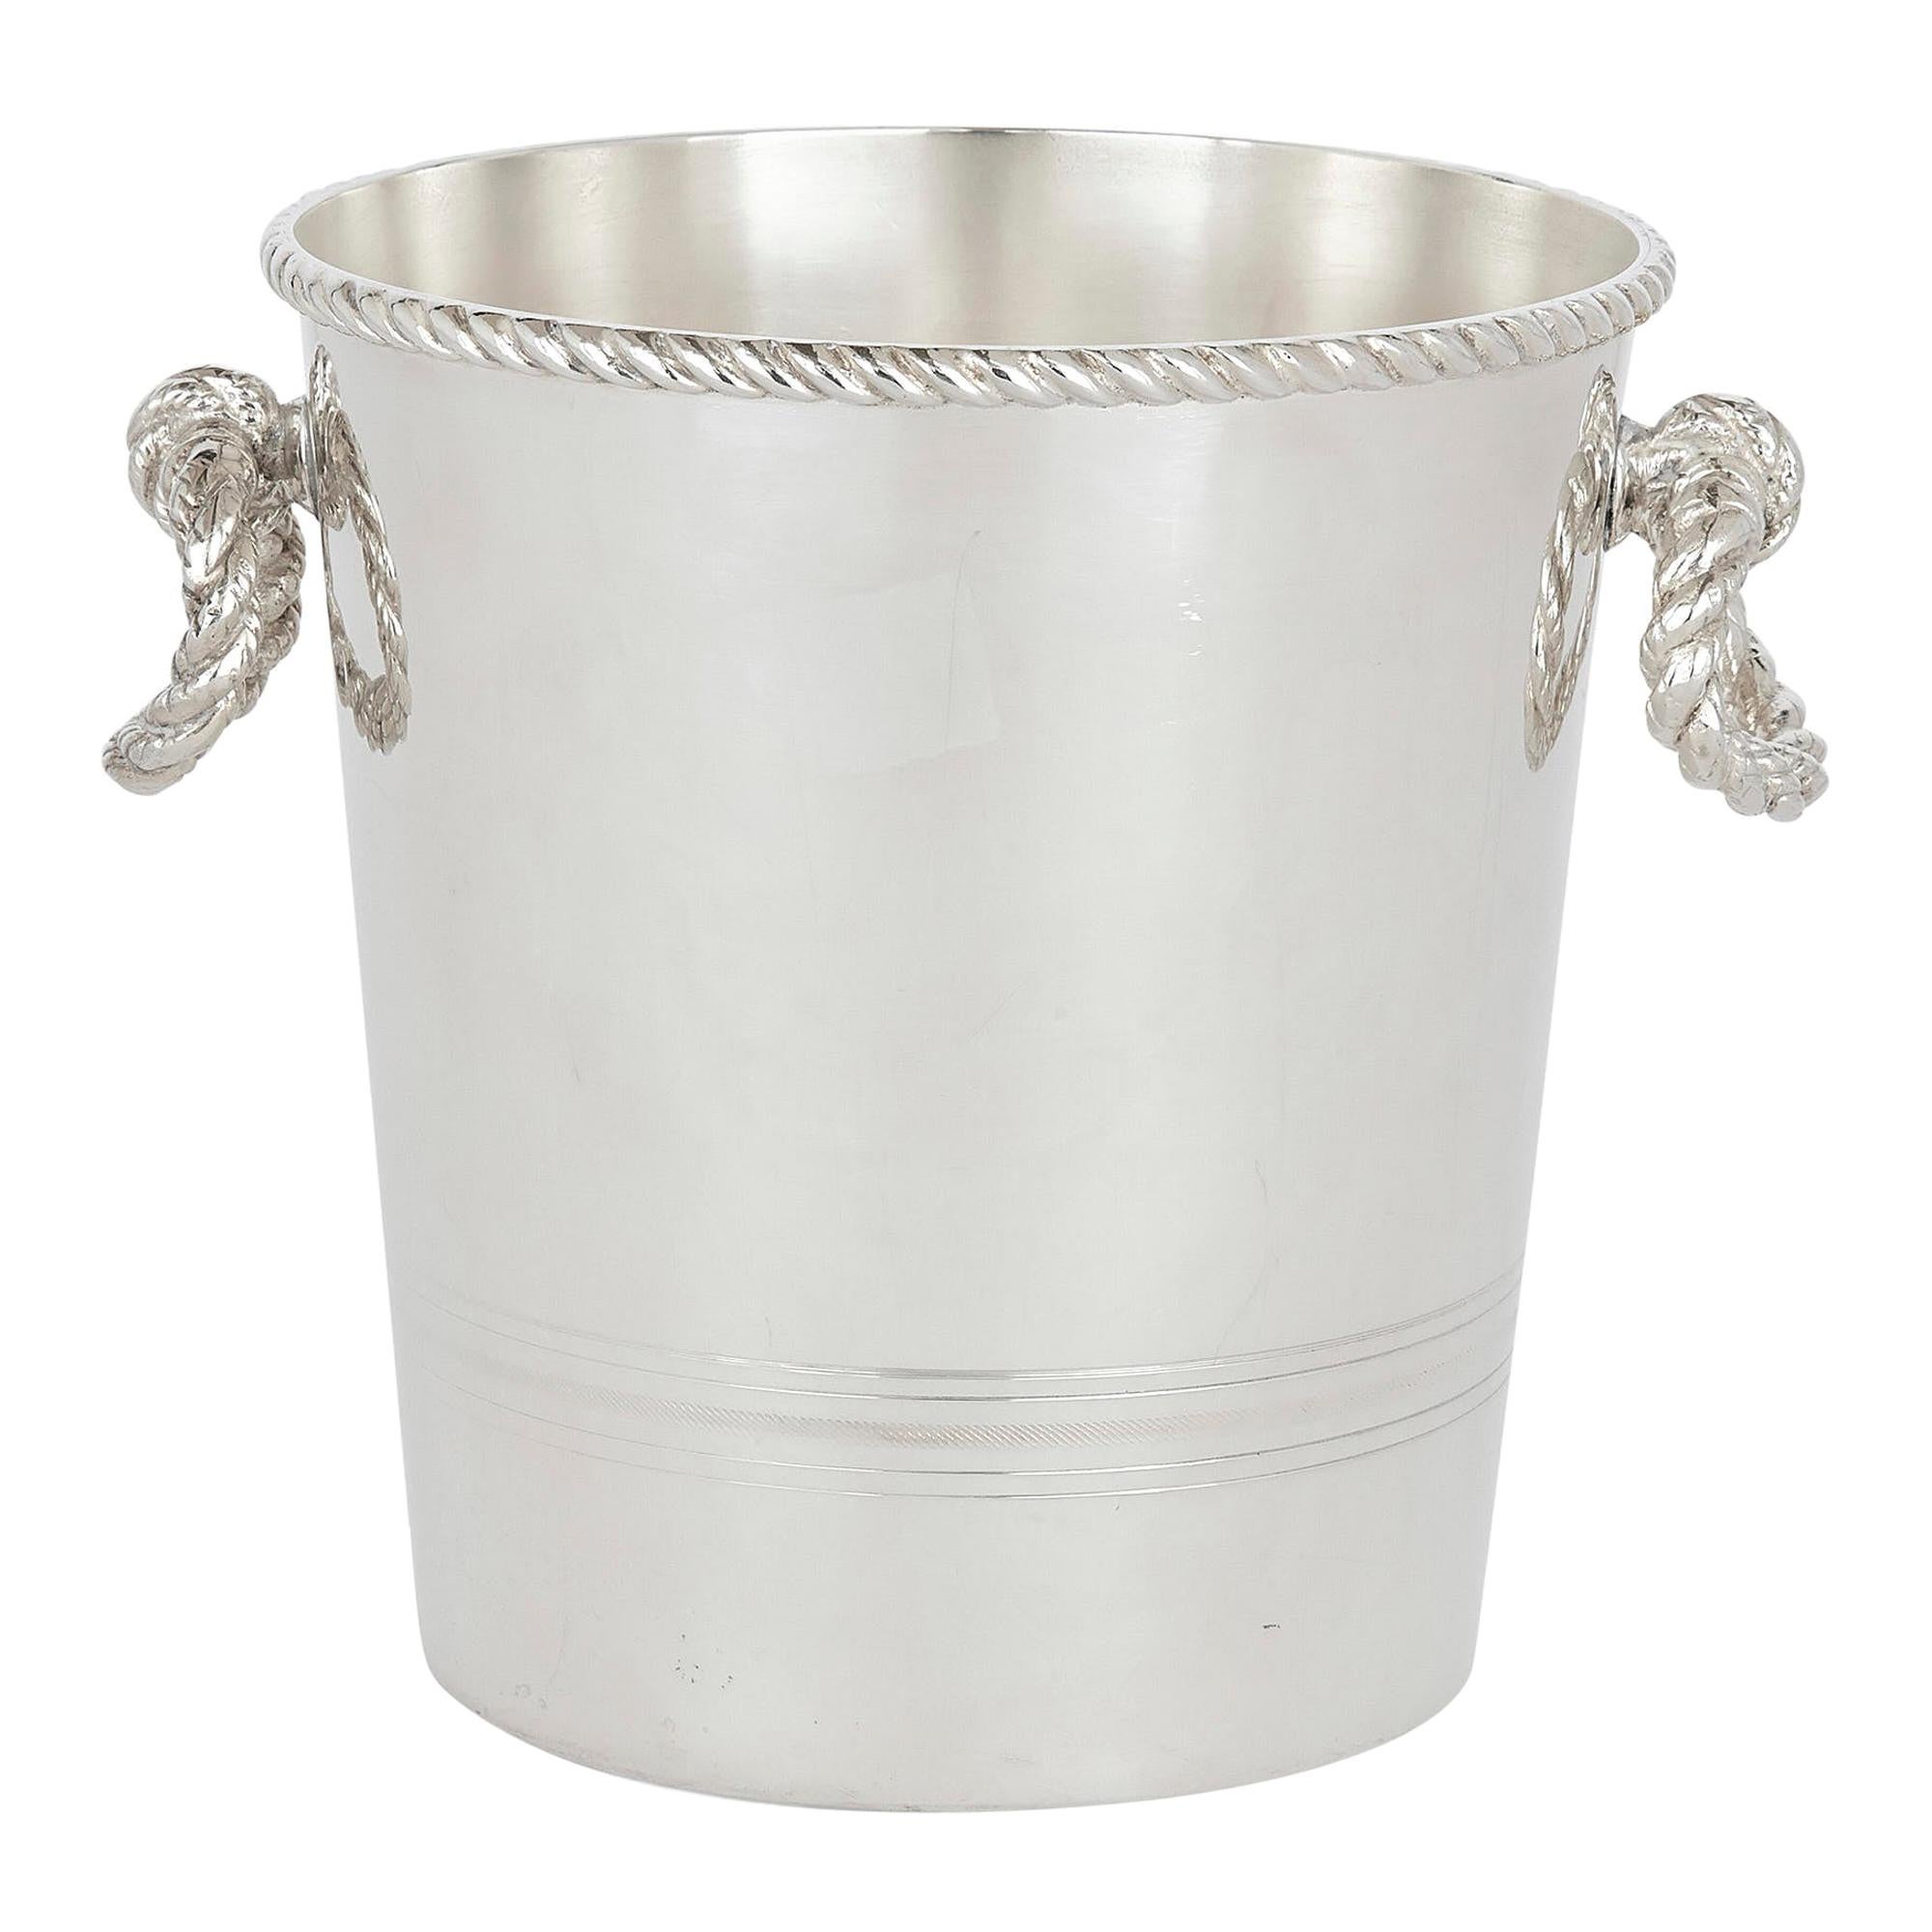 Fine Silver-Plate Ice Bucket by Lebanese Firm Habis